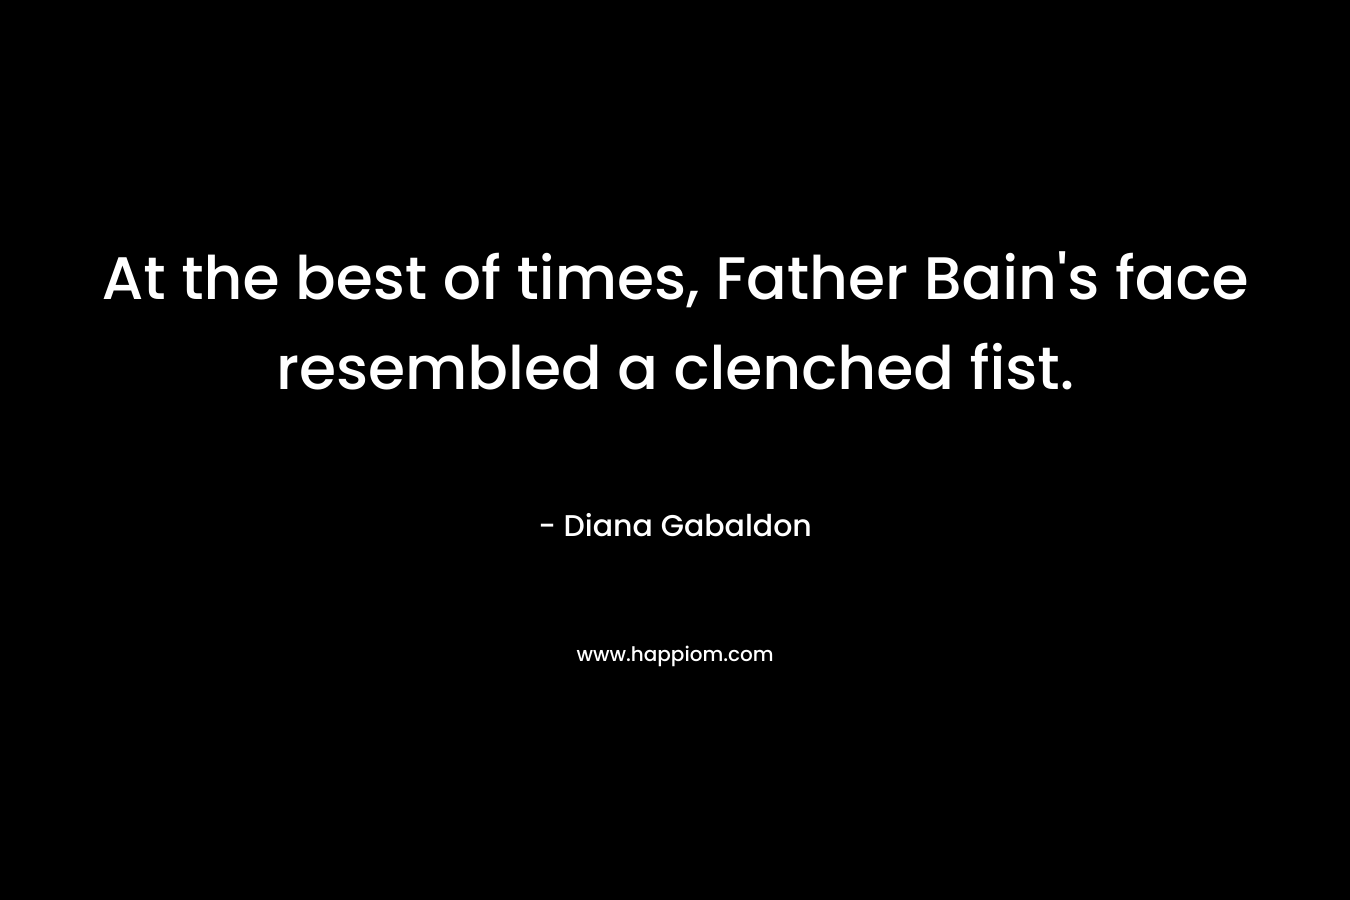 At the best of times, Father Bain’s face resembled a clenched fist. – Diana Gabaldon